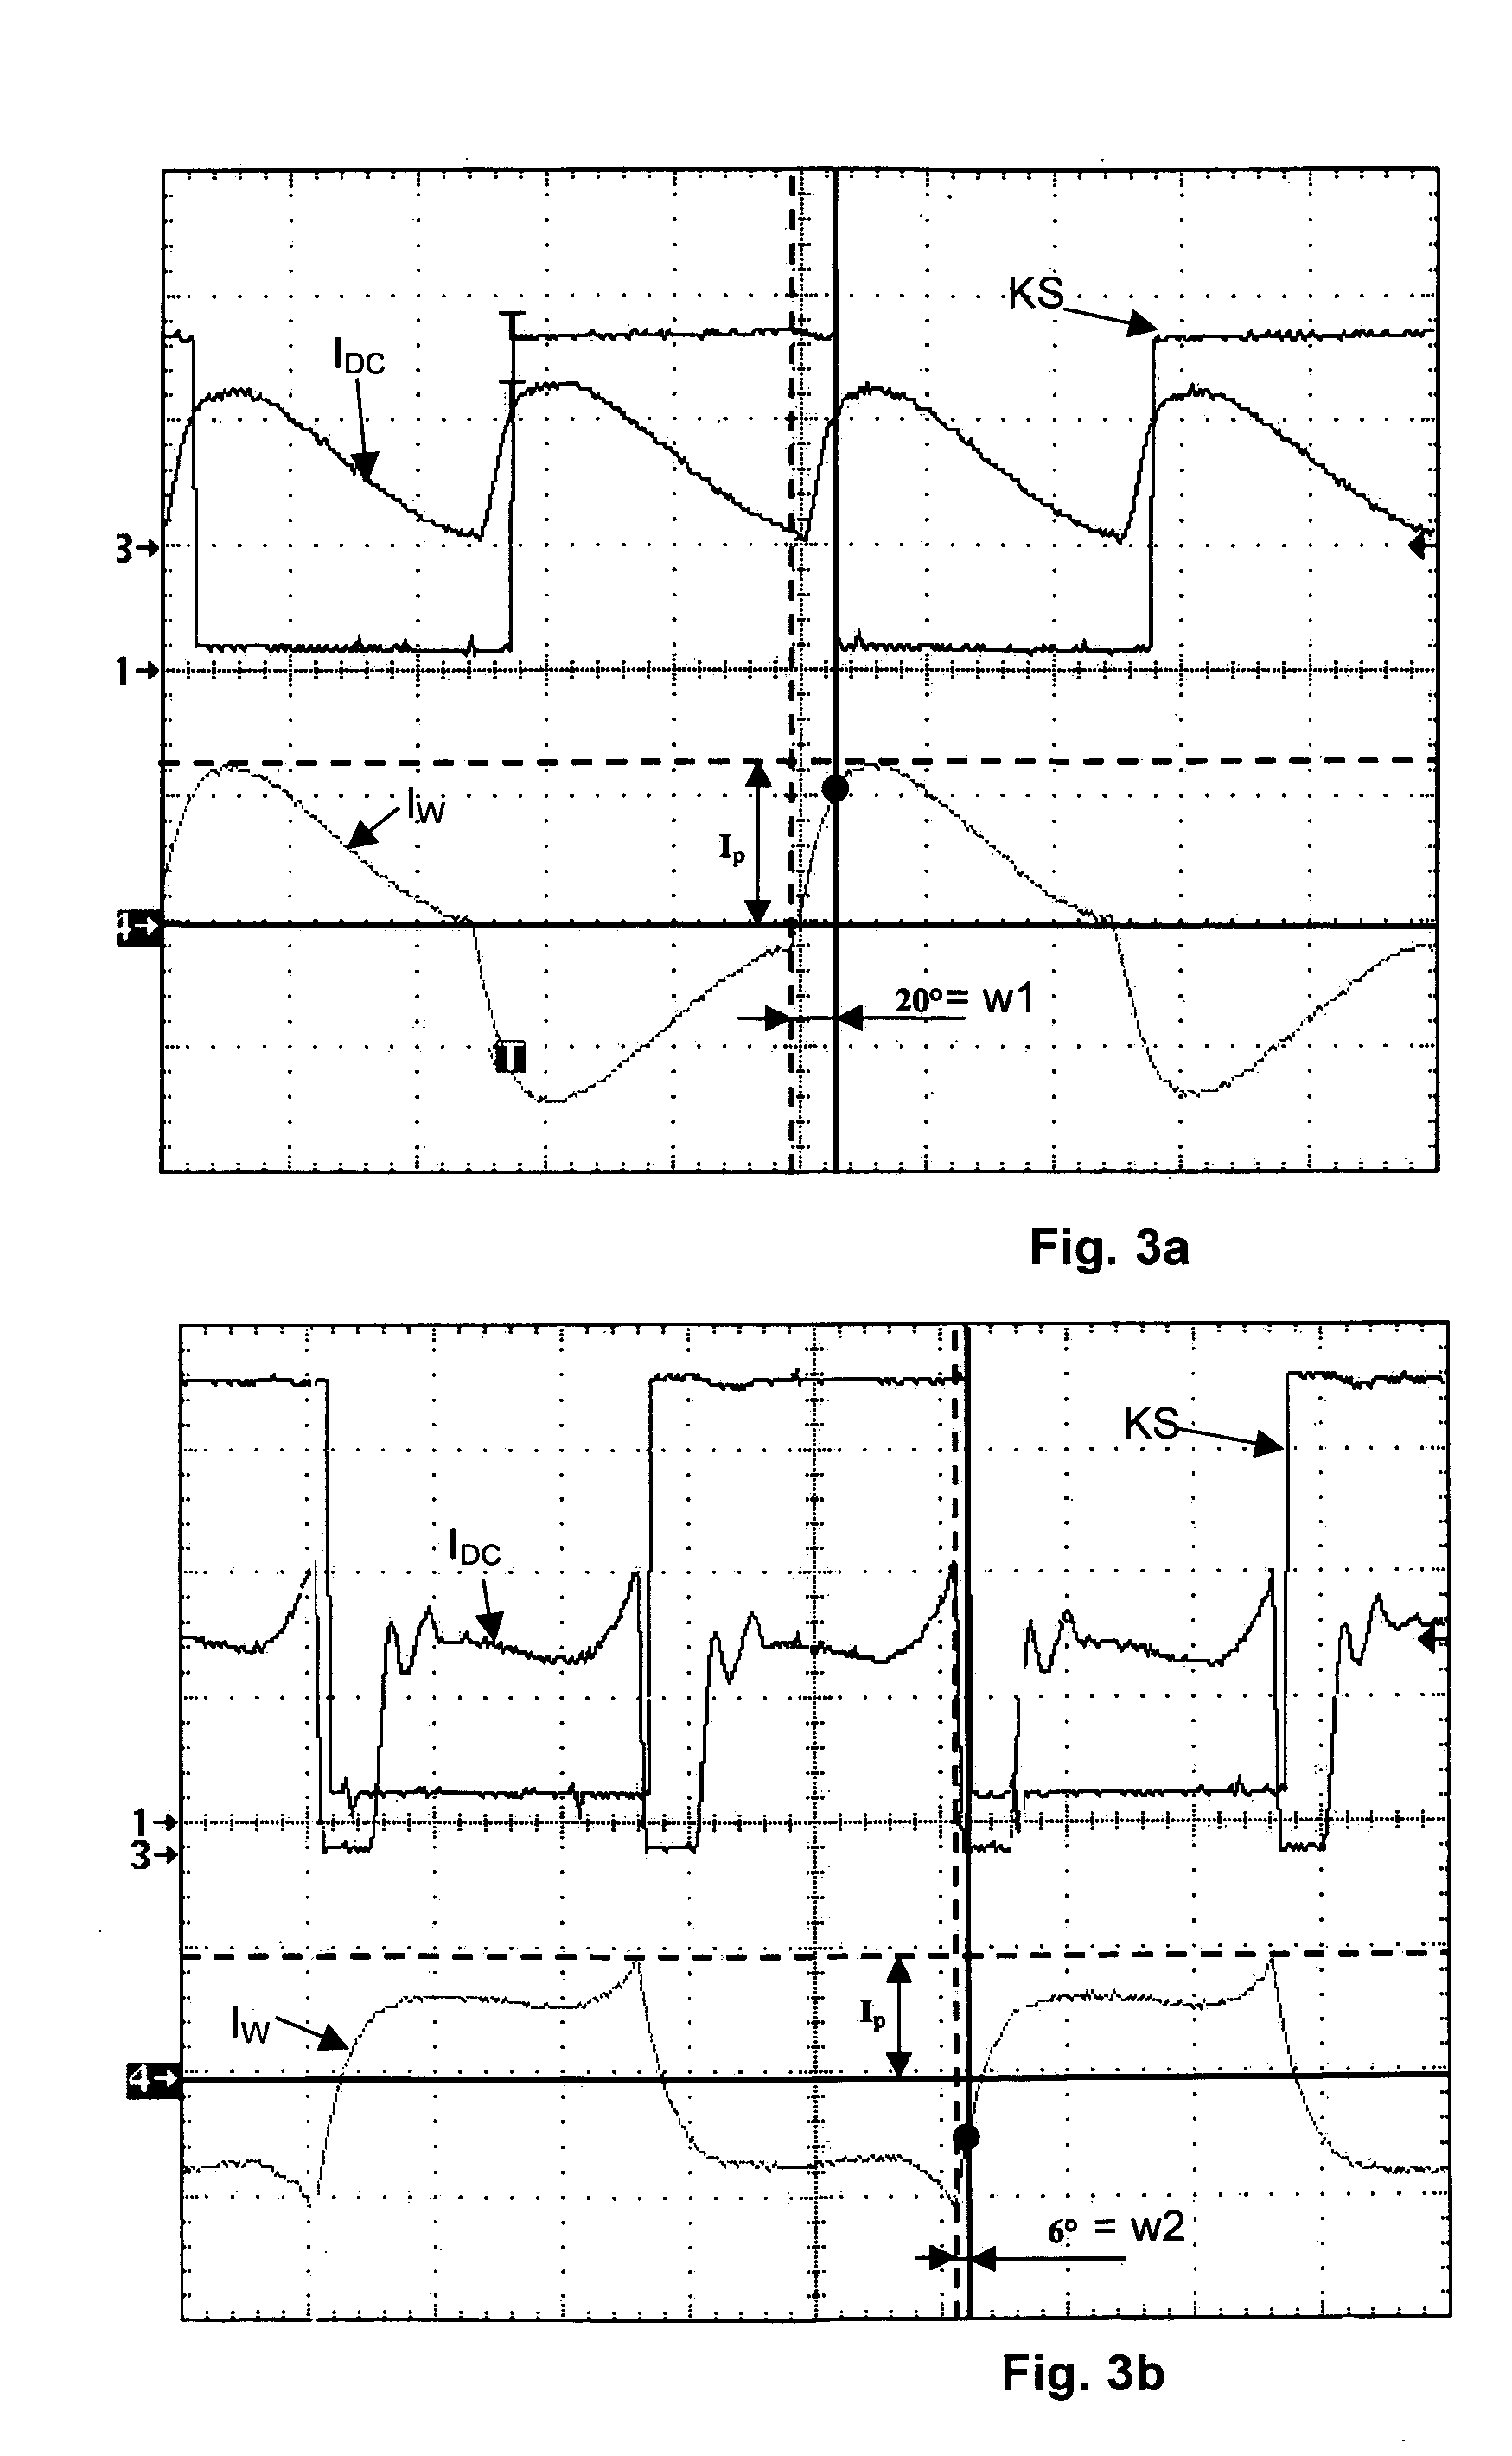 Method for optimizing the efficiency of a motor operated under a load